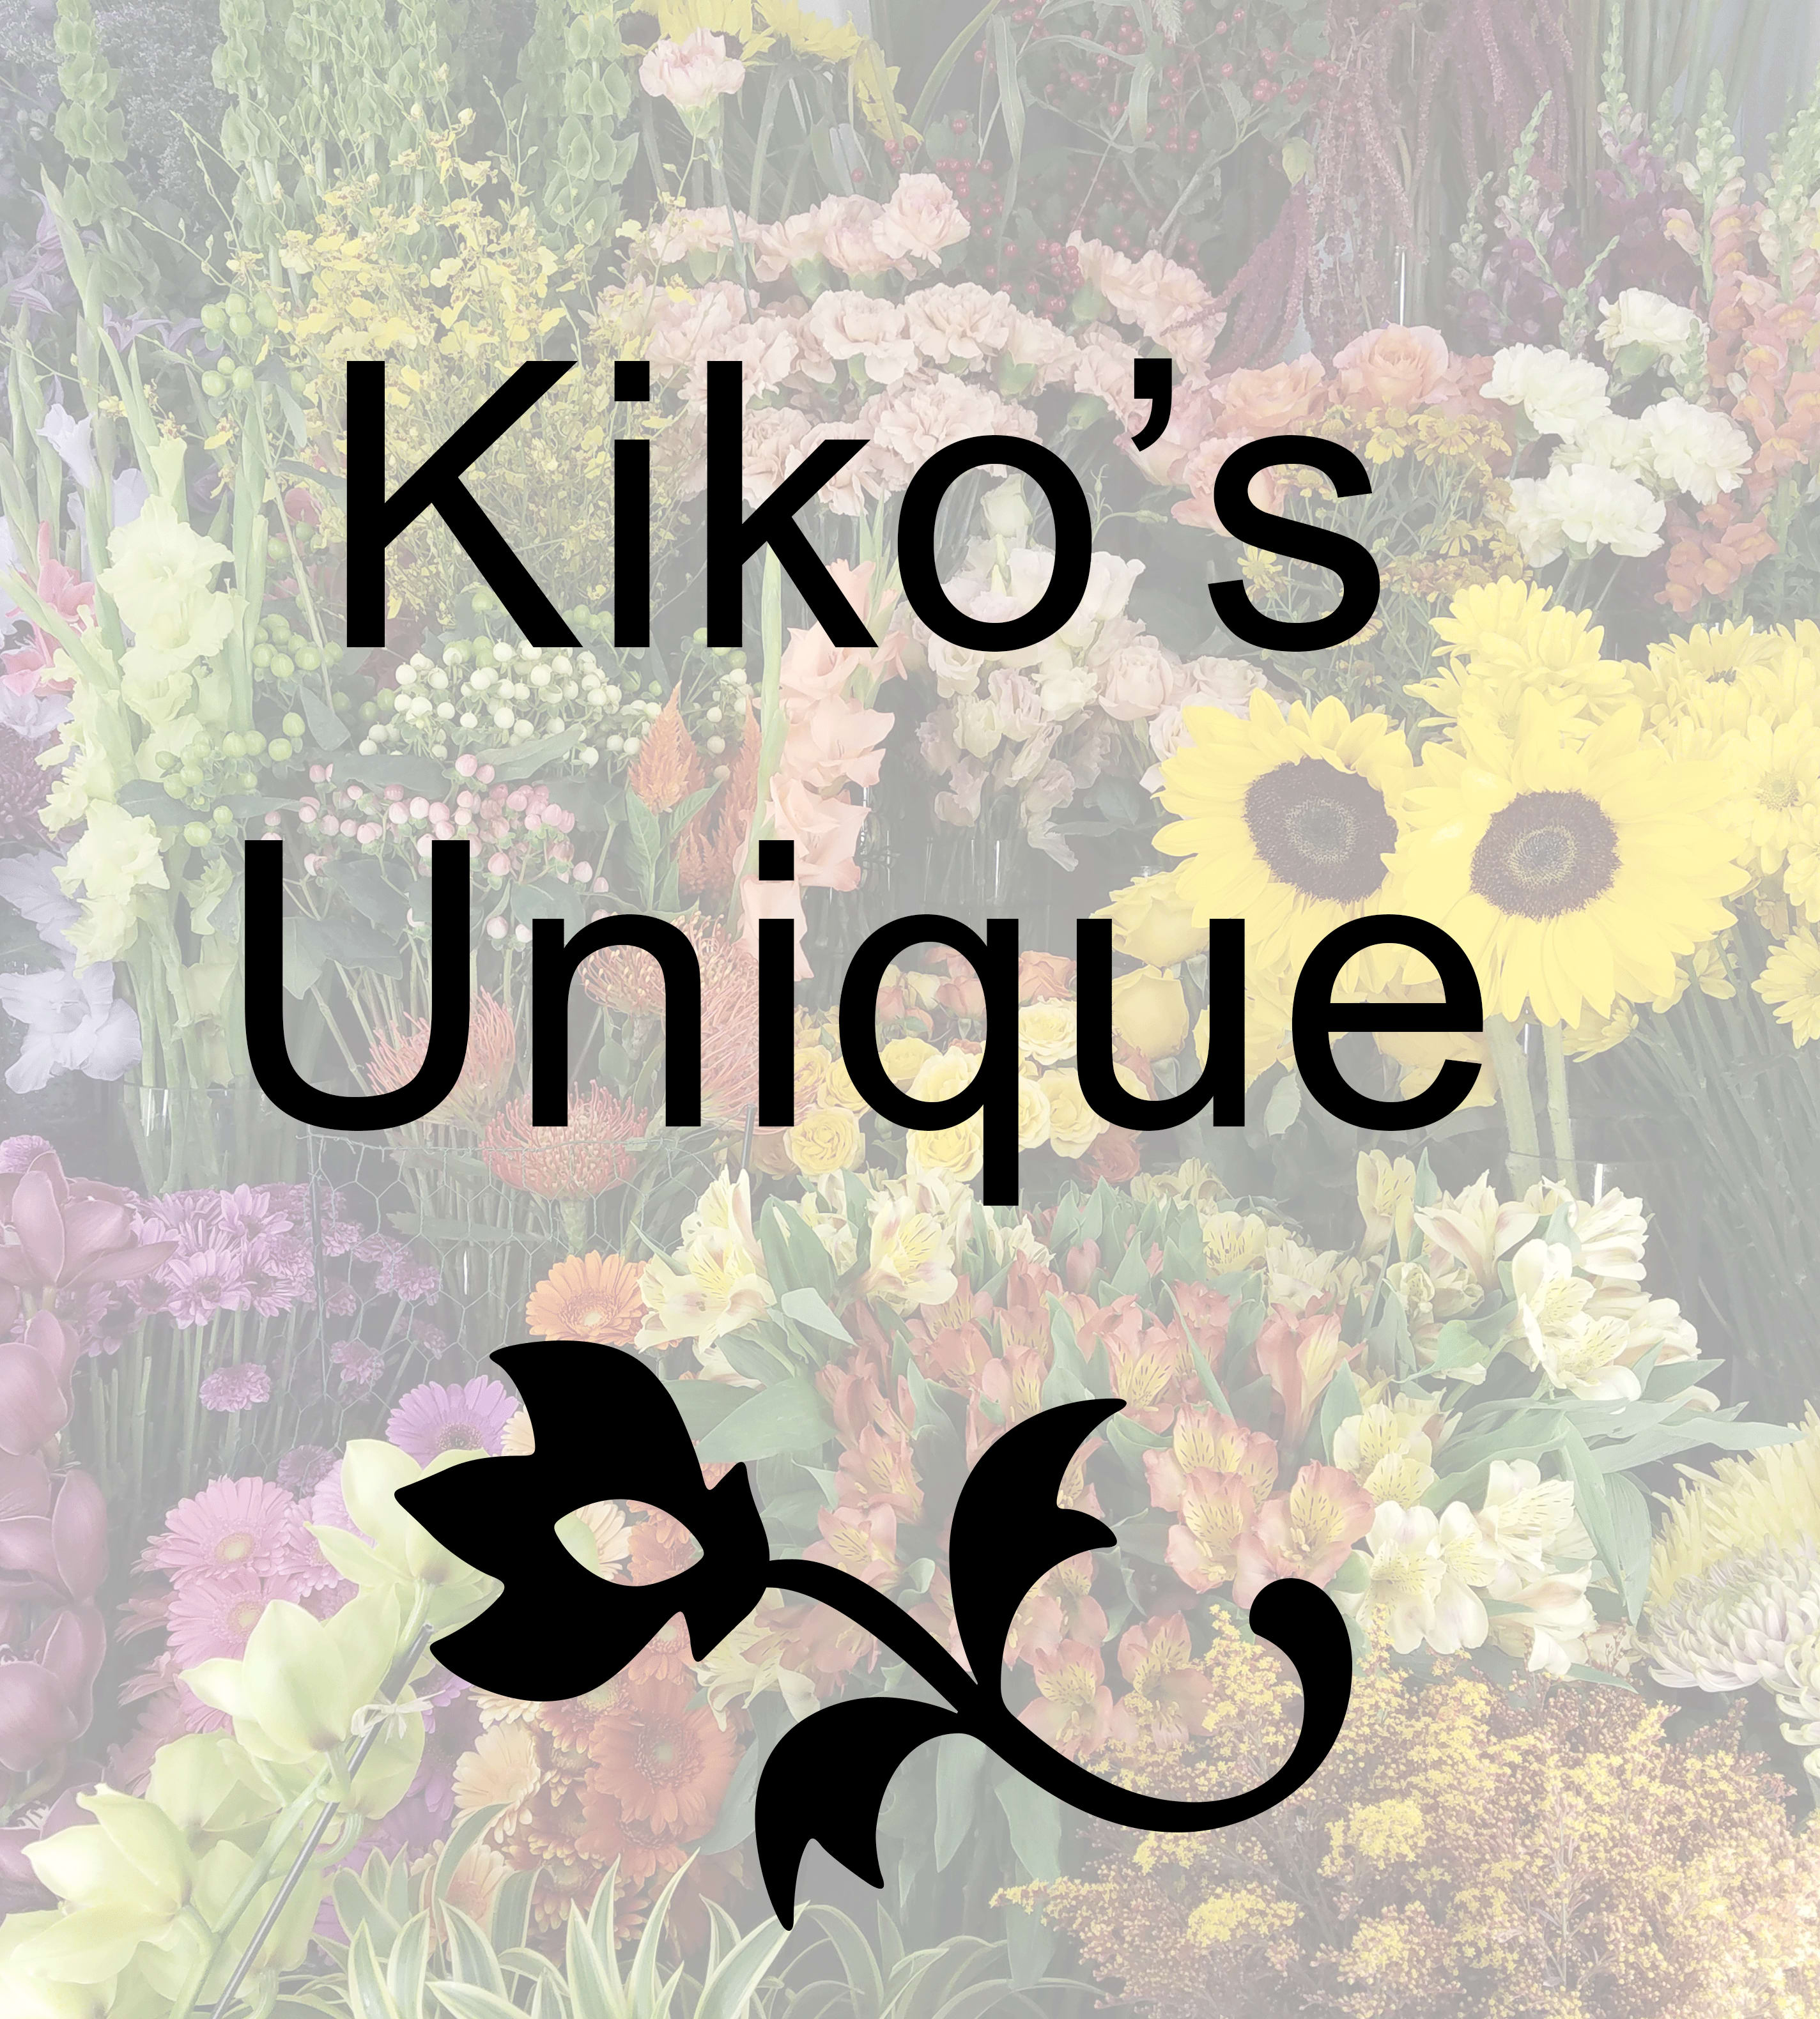 Kiko's Unique - Kiko’s unique creations are stunning, one-of-a-kind designs you won’t find anywhere else. When placing your order, PLEASE use the FLORIST INSTRUCTIONS section on the delivery information page to share your preferences, Eg. compact, whispy, gardeny, springy, bright, pastel, monochromatic, etc… Be creative and we will do exactly that for you!